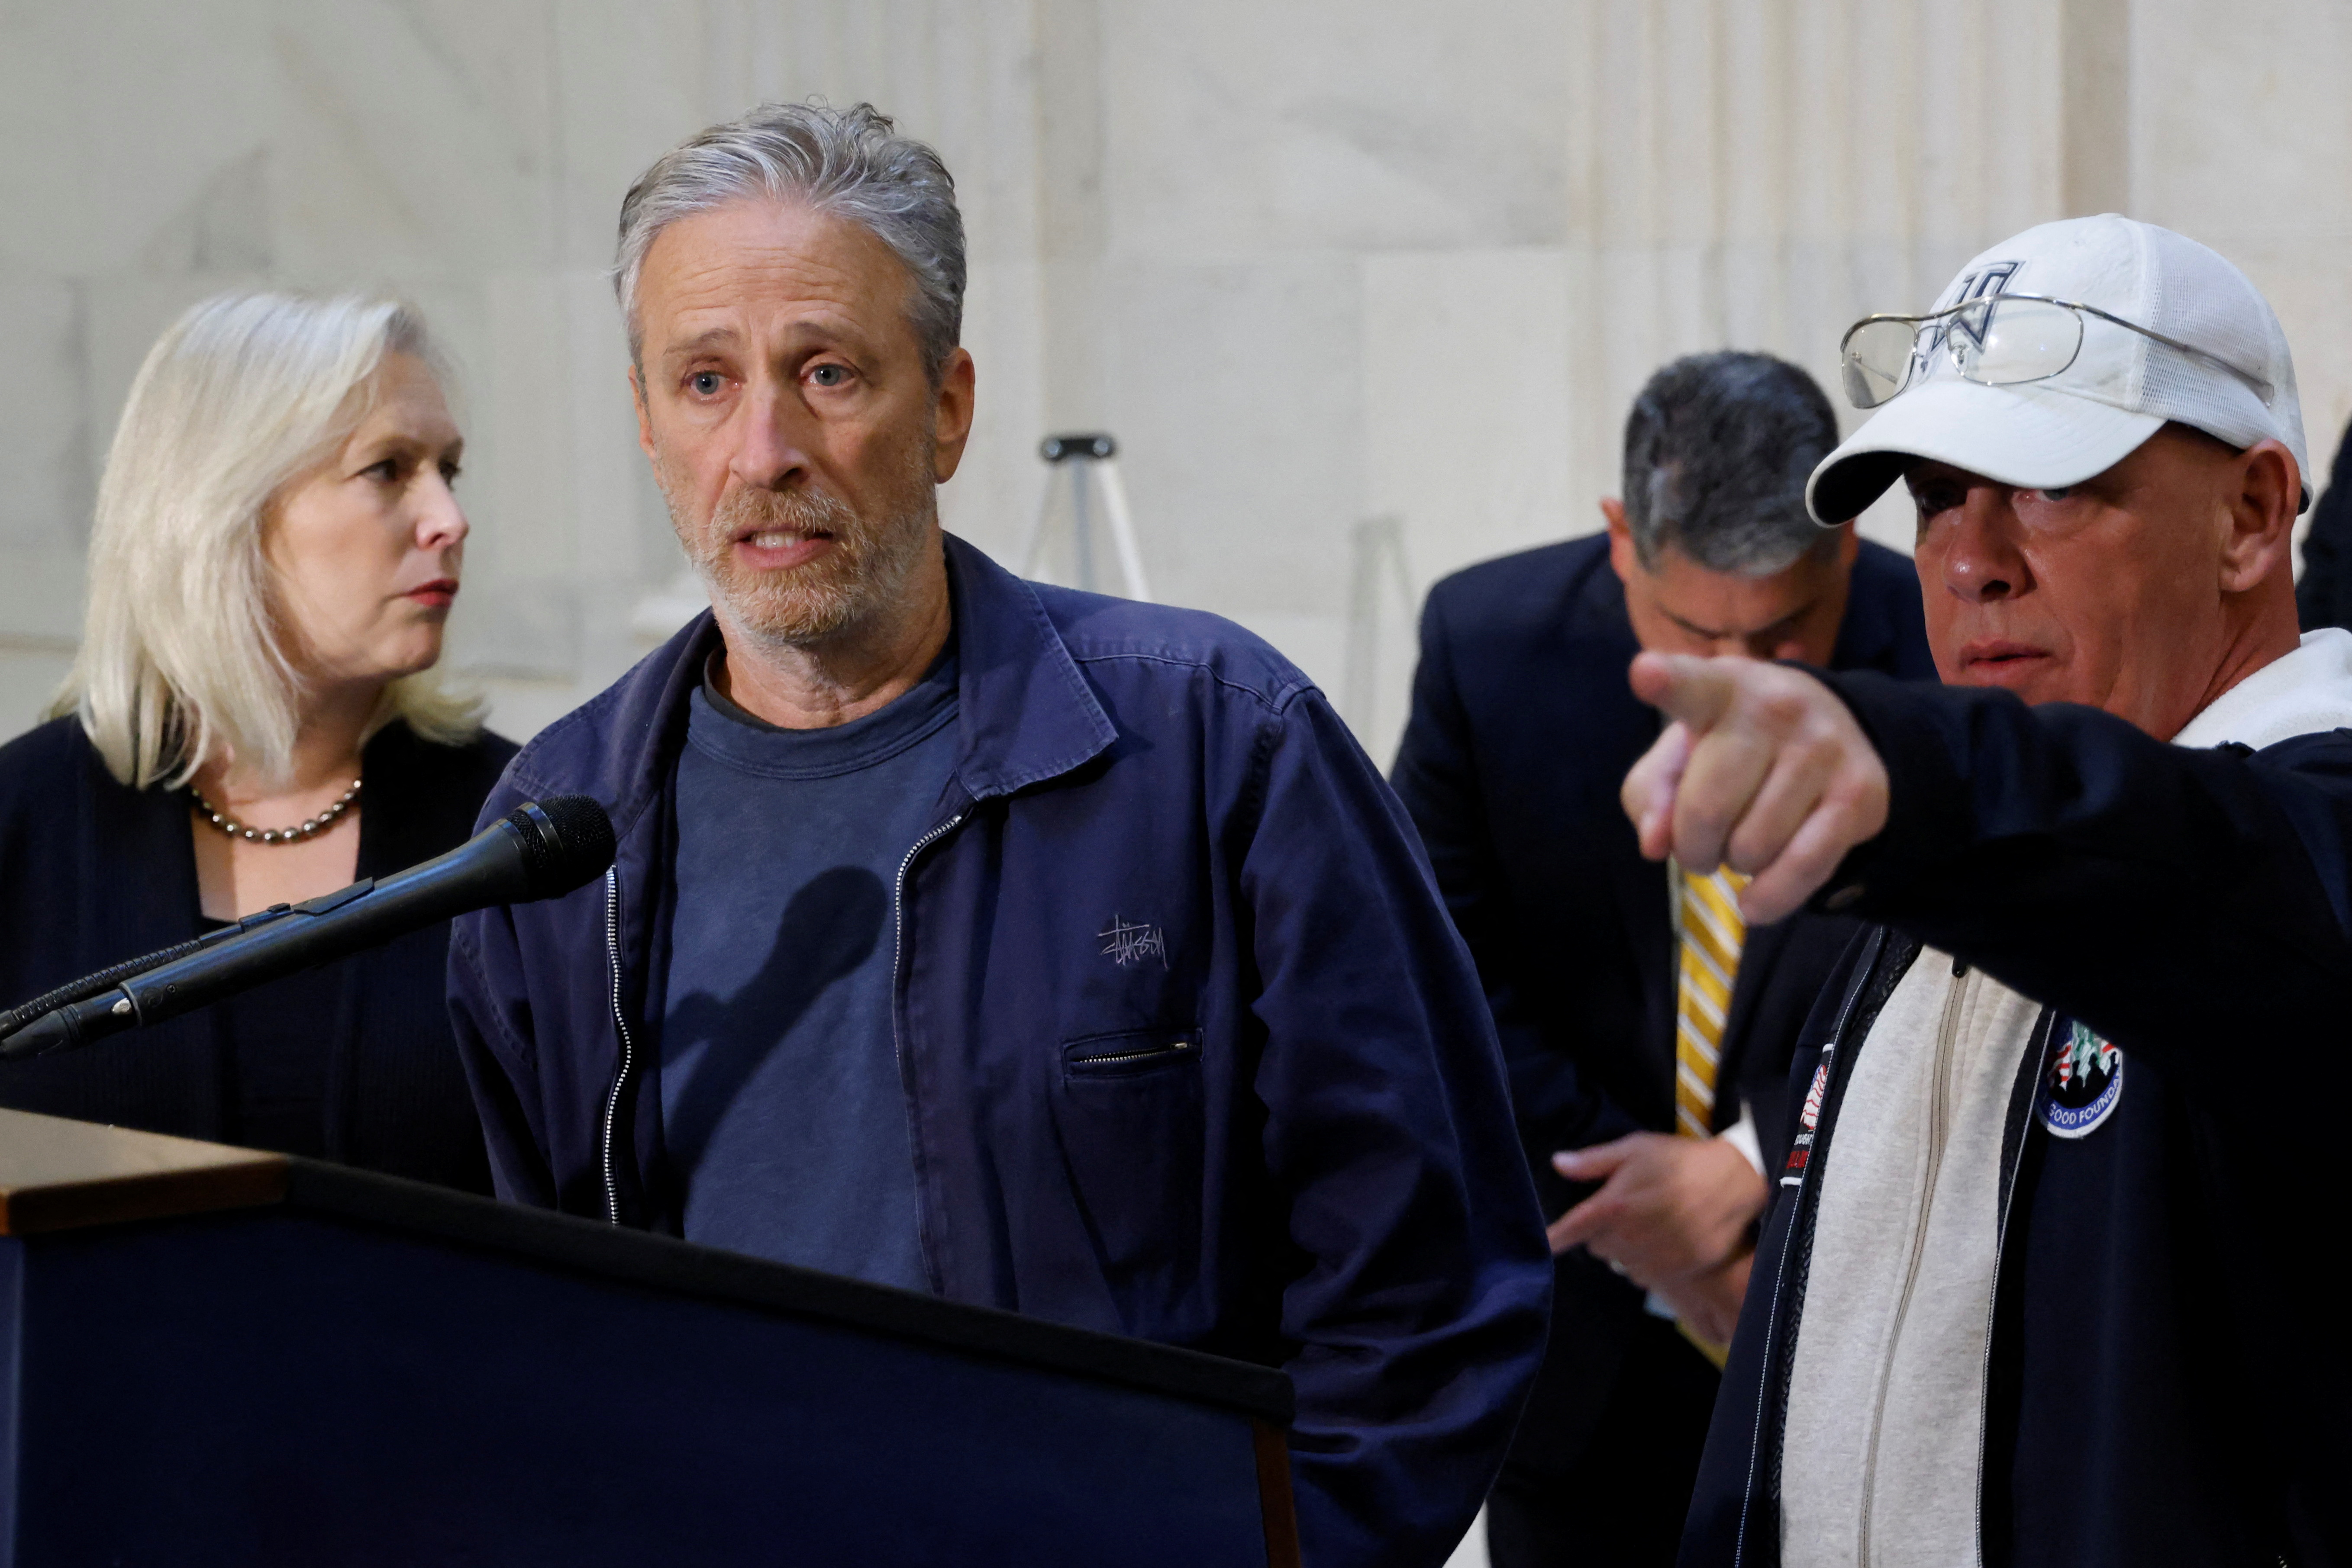 Jon Stewart, with U.S. Sen. Gillibrand and activist Feal, speaks to reporters about their effort to raise awareness for U.S. veterans suffering from military toxic exposures, on Capitol Hill in Washington